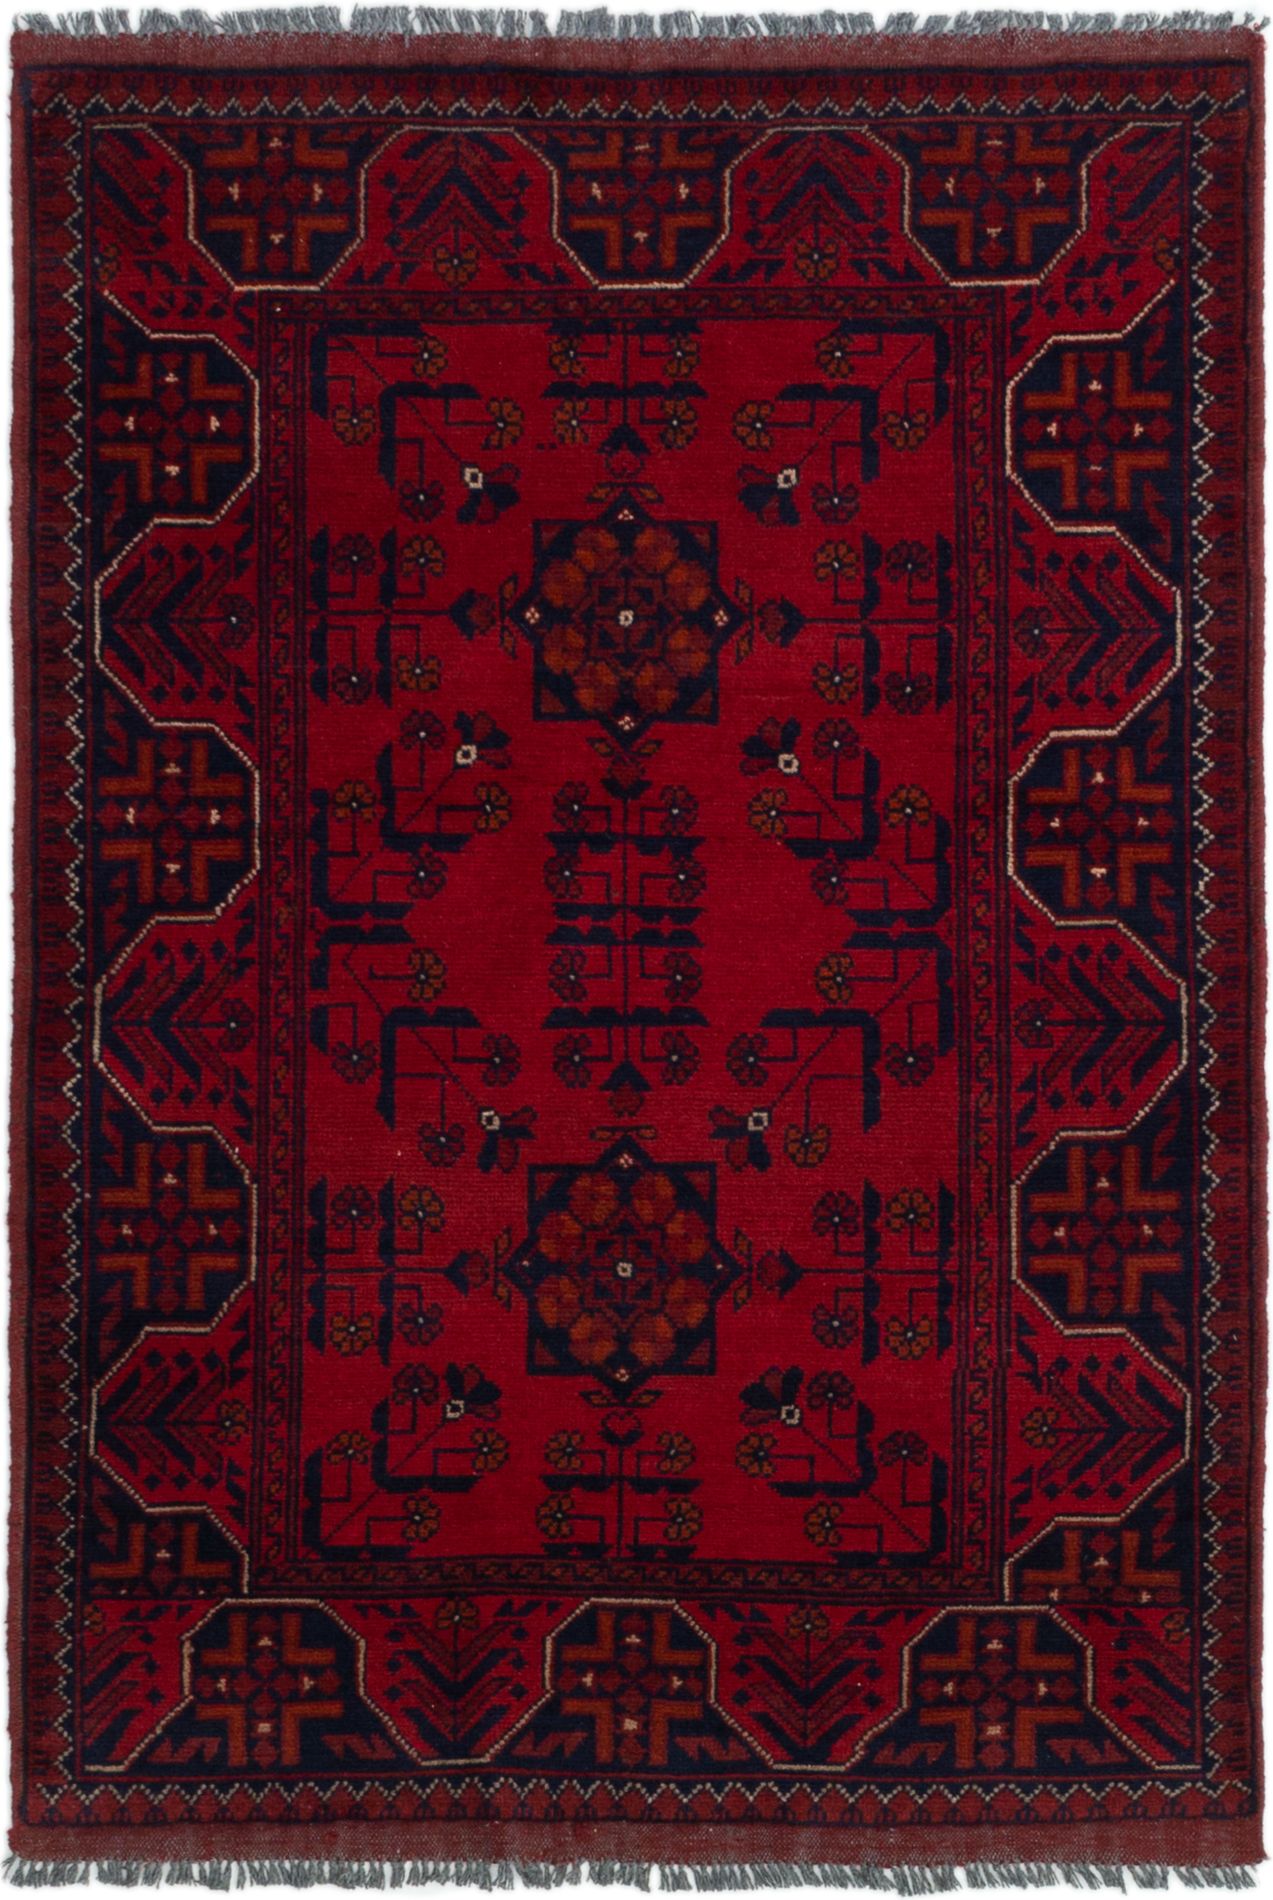 Hand-knotted Finest Khal Mohammadi Red Wool Rug 3'3" x 4'11" (34) Size: 3'3" x 4'11"  